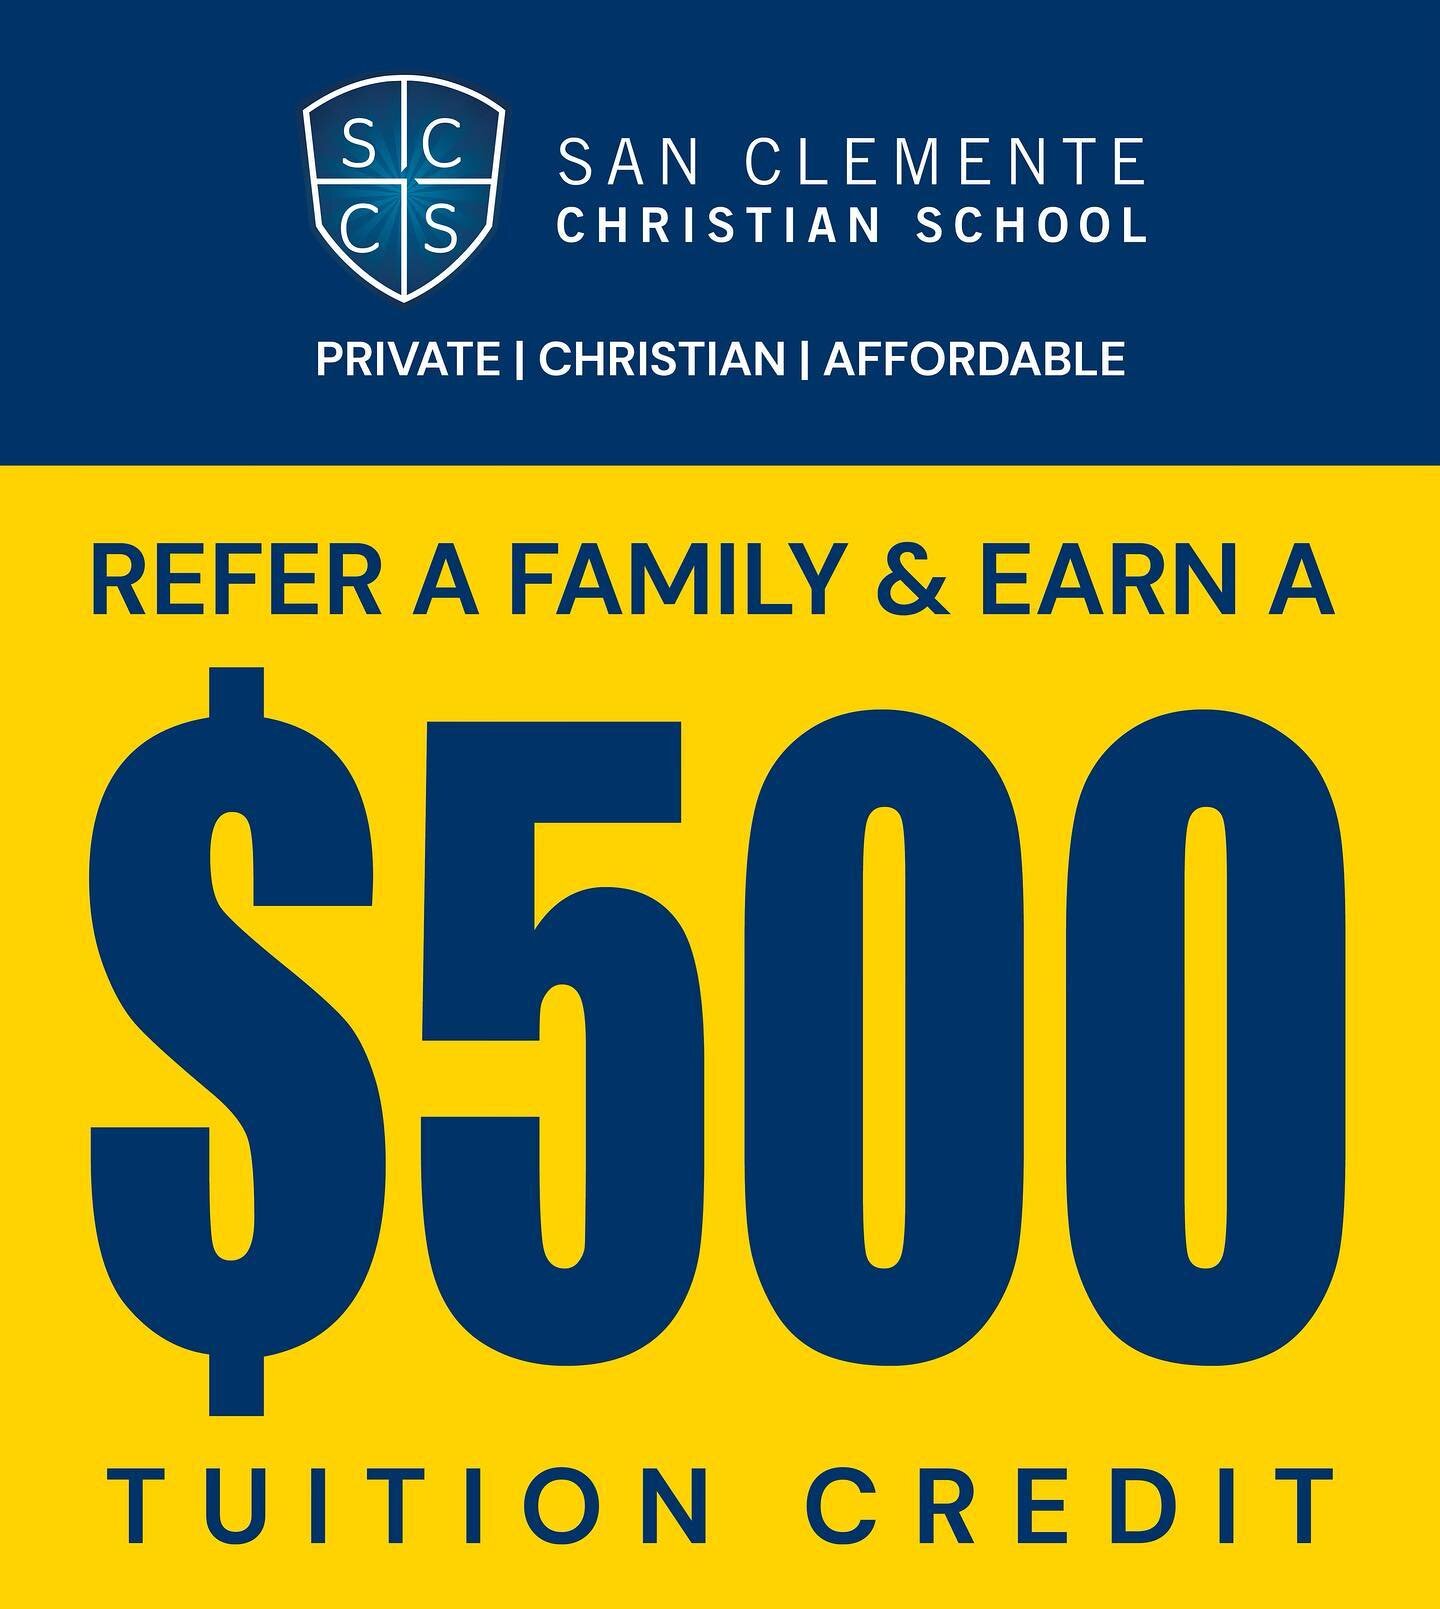 Now is a great time to tell your family, friends and neighbors about SCCS!

Enrollment is open for Fall 2023 for all grades. If you&rsquo;re a current family, you can get a $500 credit for referring a new enrolling family for the fall.

Offer good Ma